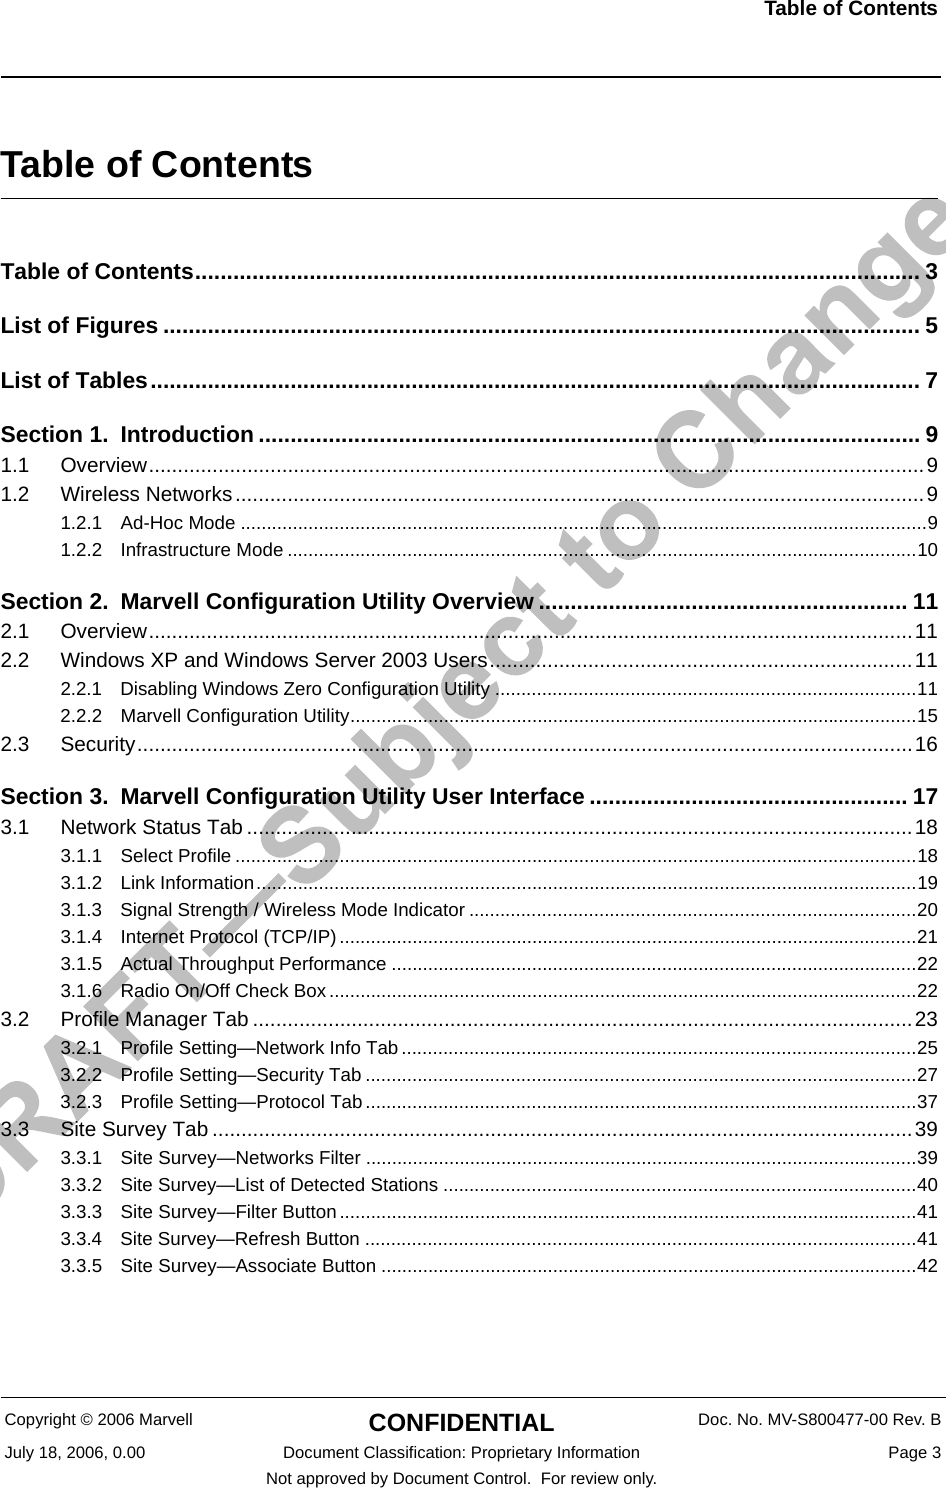 Table of Contents                         Copyright © 2006 Marvell CONFIDENTIAL Doc. No. MV-S800477-00 Rev. BJuly 18, 2006, 0.00 Document Classification: Proprietary Information  Page 3Not approved by Document Control.  For review only.Table of ContentsTable of Contents.................................................................................................................. 3List of Figures ....................................................................................................................... 5List of Tables......................................................................................................................... 7Section 1. Introduction ........................................................................................................ 91.1 Overview......................................................................................................................................91.2 Wireless Networks.......................................................................................................................91.2.1 Ad-Hoc Mode ....................................................................................................................................91.2.2 Infrastructure Mode .........................................................................................................................10Section 2. Marvell Configuration Utility Overview .......................................................... 112.1 Overview....................................................................................................................................112.2 Windows XP and Windows Server 2003 Users.........................................................................112.2.1 Disabling Windows Zero Configuration Utility .................................................................................112.2.2 Marvell Configuration Utility.............................................................................................................152.3 Security......................................................................................................................................16Section 3. Marvell Configuration Utility User Interface .................................................. 173.1 Network Status Tab ...................................................................................................................183.1.1 Select Profile ...................................................................................................................................183.1.2 Link Information...............................................................................................................................193.1.3 Signal Strength / Wireless Mode Indicator ......................................................................................203.1.4 Internet Protocol (TCP/IP)...............................................................................................................213.1.5 Actual Throughput Performance .....................................................................................................223.1.6 Radio On/Off Check Box.................................................................................................................223.2 Profile Manager Tab ..................................................................................................................233.2.1 Profile Setting—Network Info Tab ...................................................................................................253.2.2 Profile Setting—Security Tab ..........................................................................................................273.2.3 Profile Setting—Protocol Tab..........................................................................................................373.3 Site Survey Tab .........................................................................................................................393.3.1 Site Survey—Networks Filter ..........................................................................................................393.3.2 Site Survey—List of Detected Stations ...........................................................................................403.3.3 Site Survey—Filter Button...............................................................................................................413.3.4 Site Survey—Refresh Button ..........................................................................................................413.3.5 Site Survey—Associate Button .......................................................................................................42